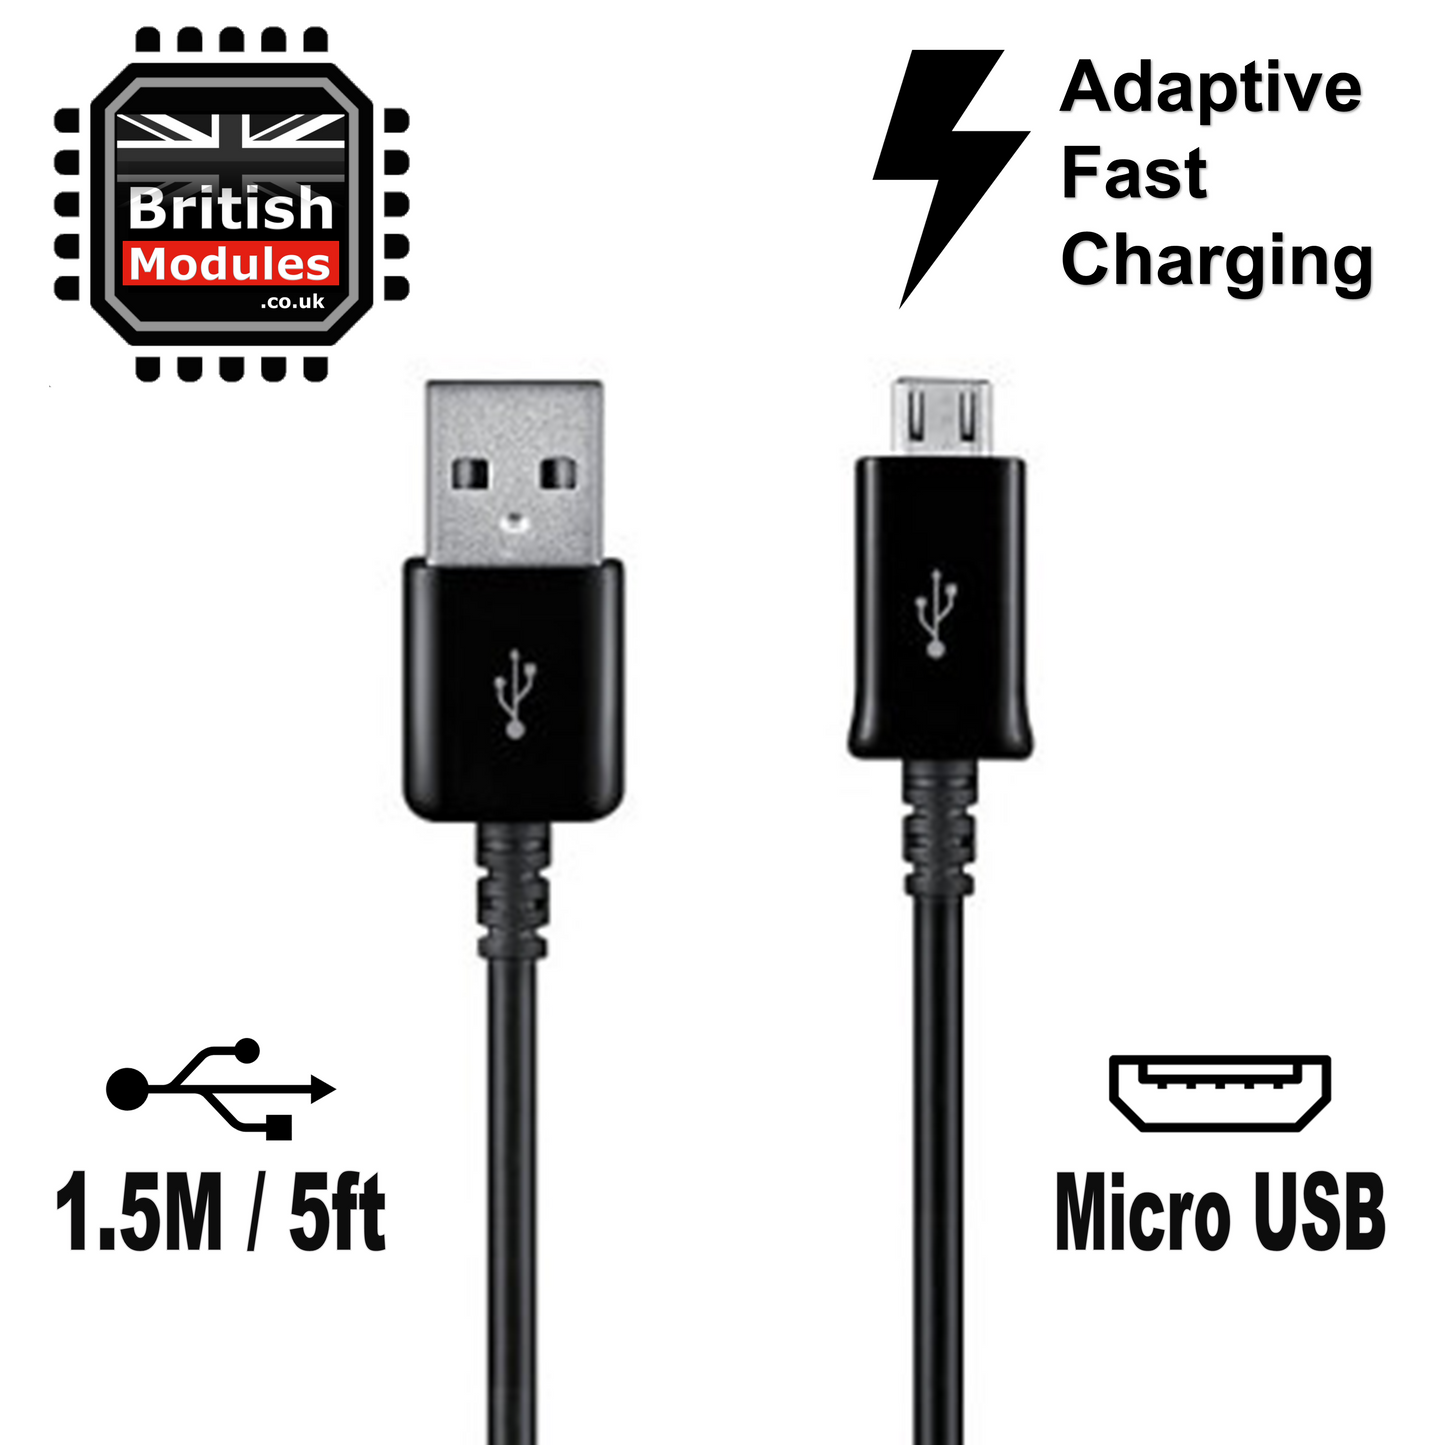 Samsung Dual Port USB Adaptive Fast Charging Car Charger with Micro USB Cable